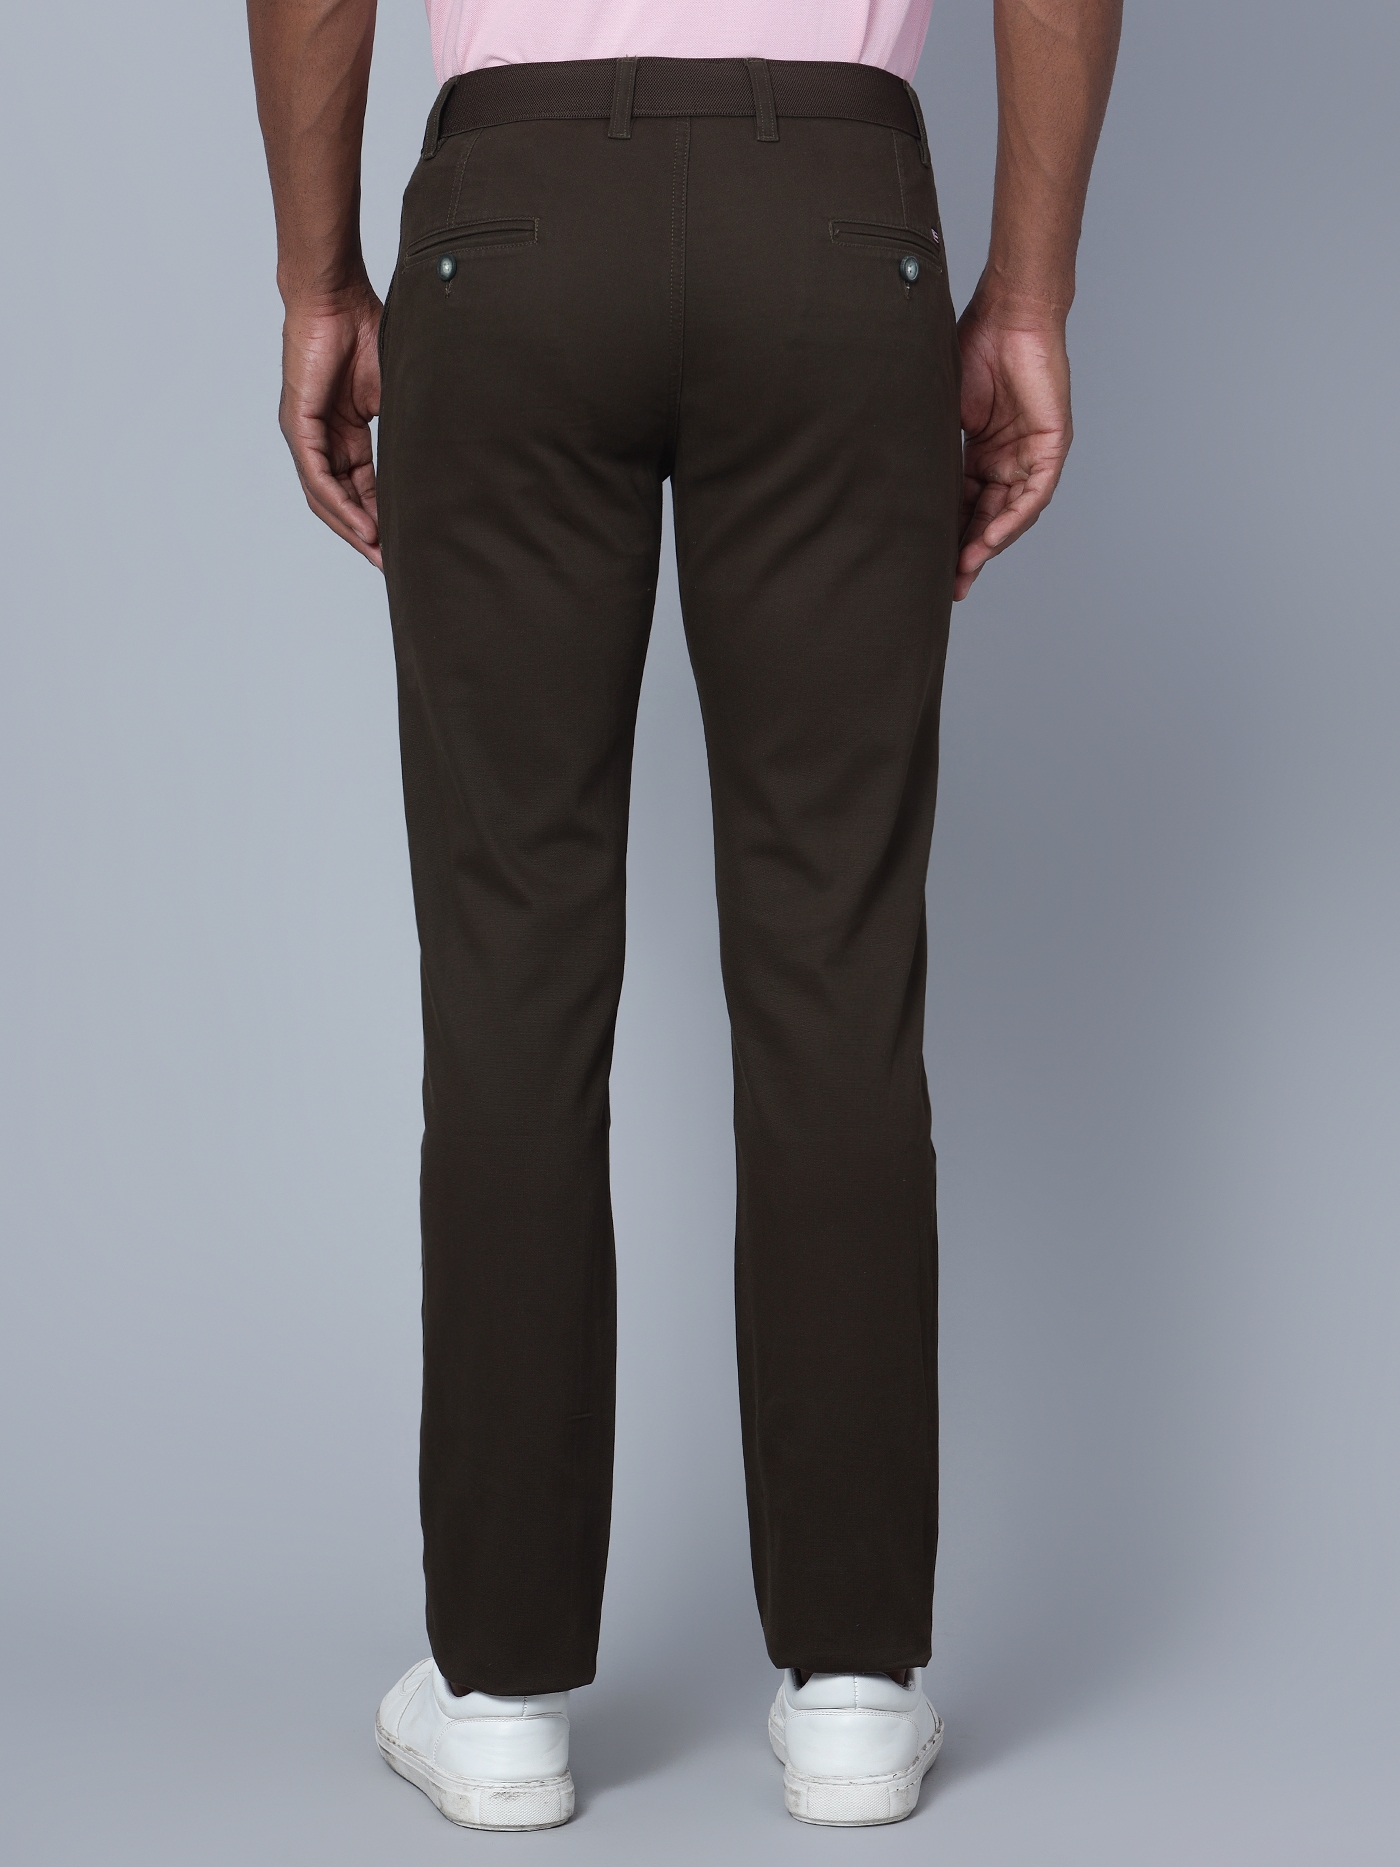 Buy Cantabil Stone Cotton Regular Fit Trousers for Mens Online @ Tata CLiQ